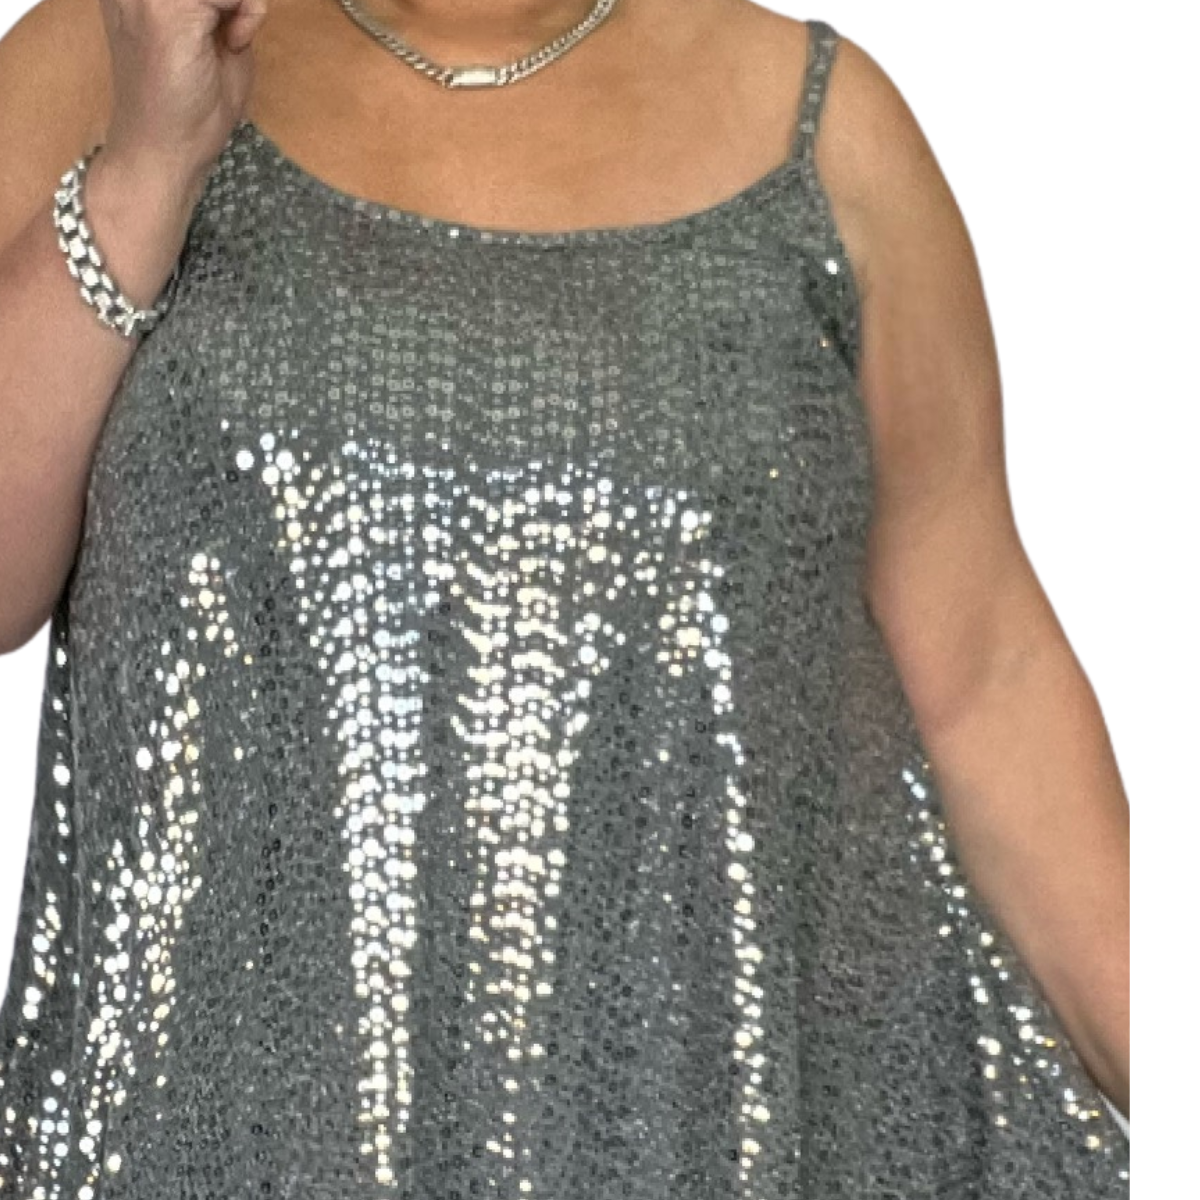 SILVER SEQUIN STRAPPY LONG LENGTH SWING TOP PARTY STYLE